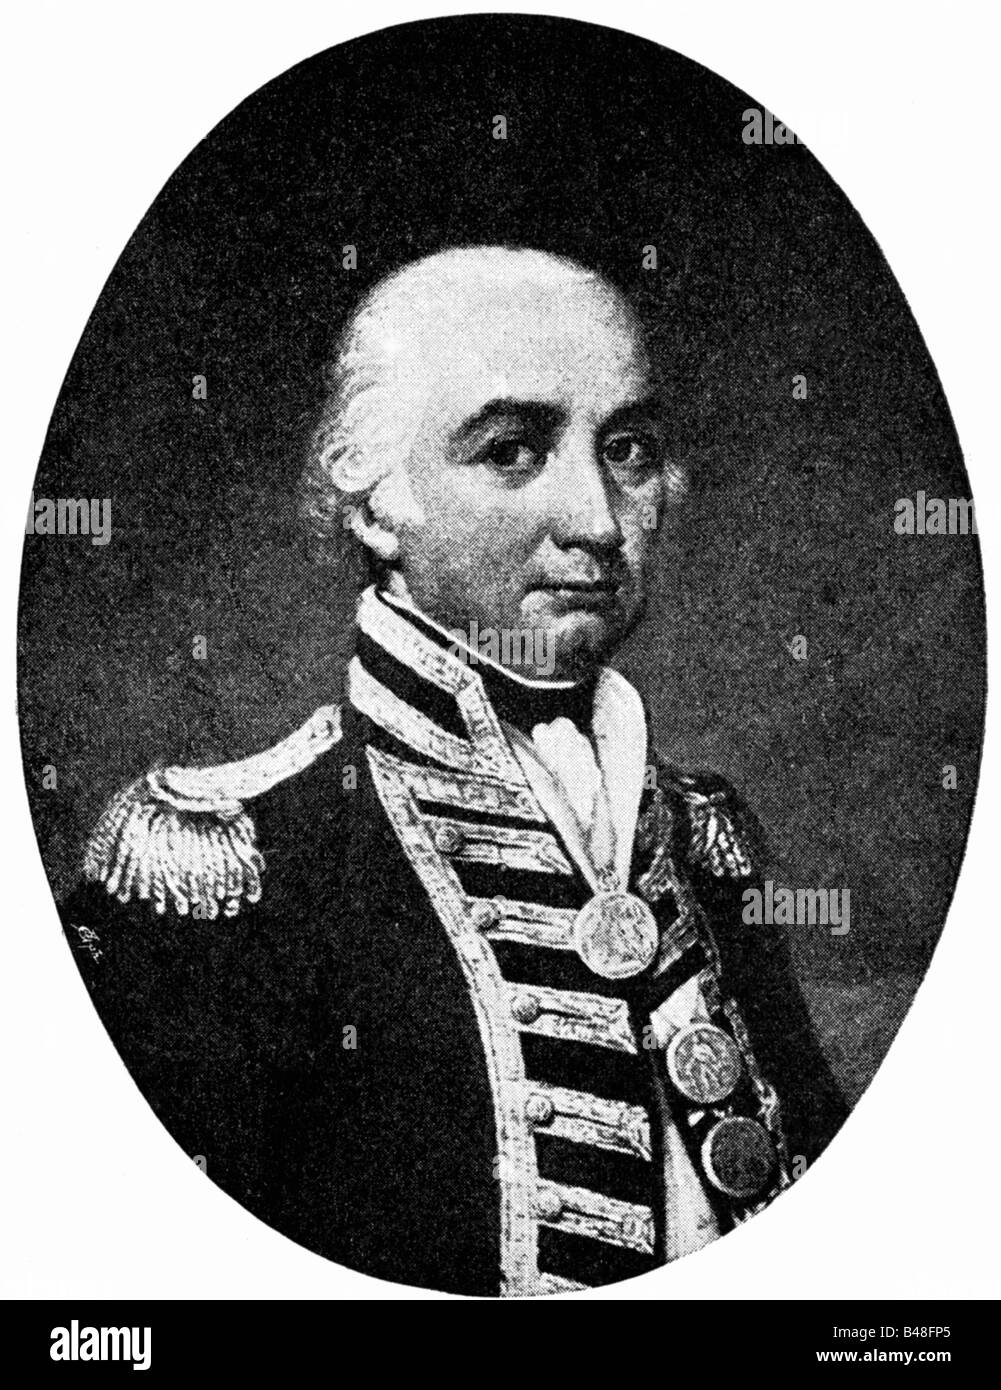 Collingwood, Cuthbert, 26.9.1750 - 7.3.1810, British Admiral, portrait, copper engraving by Turner, early 19th century, , Artist's Copyright has not to be cleared Stock Photo